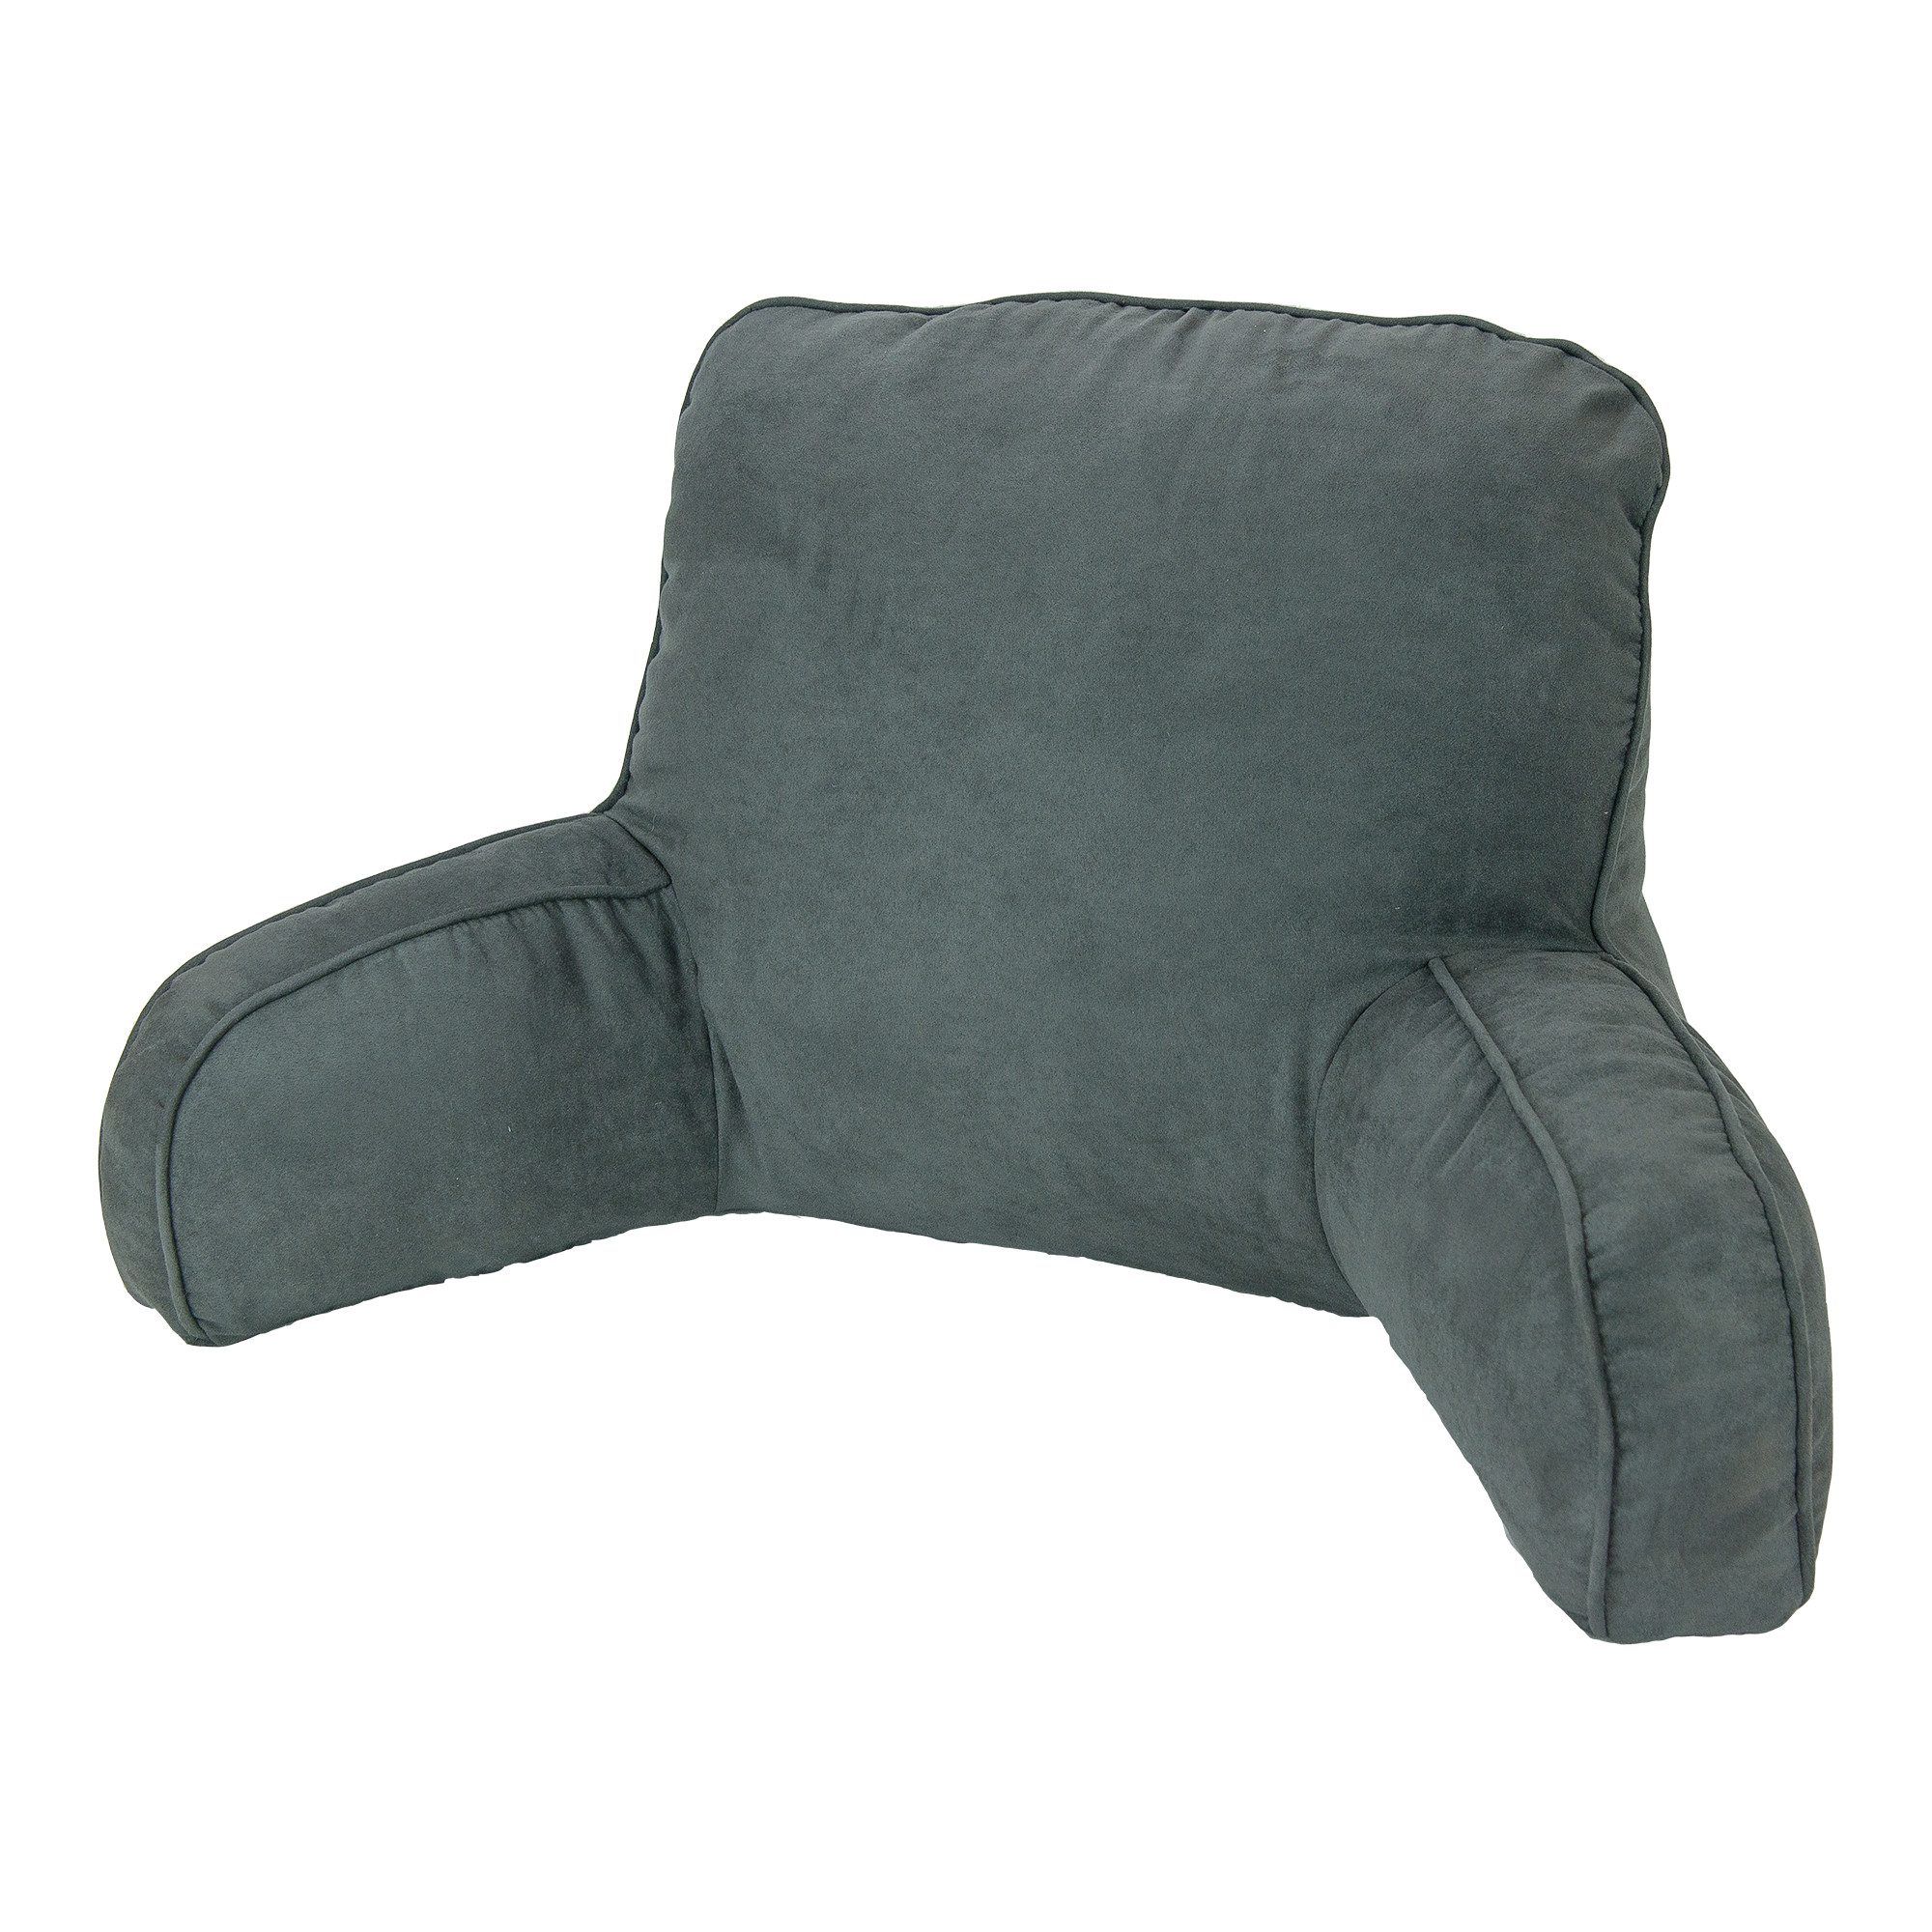 Charcoal Easy Rest Back Rest Pillow 